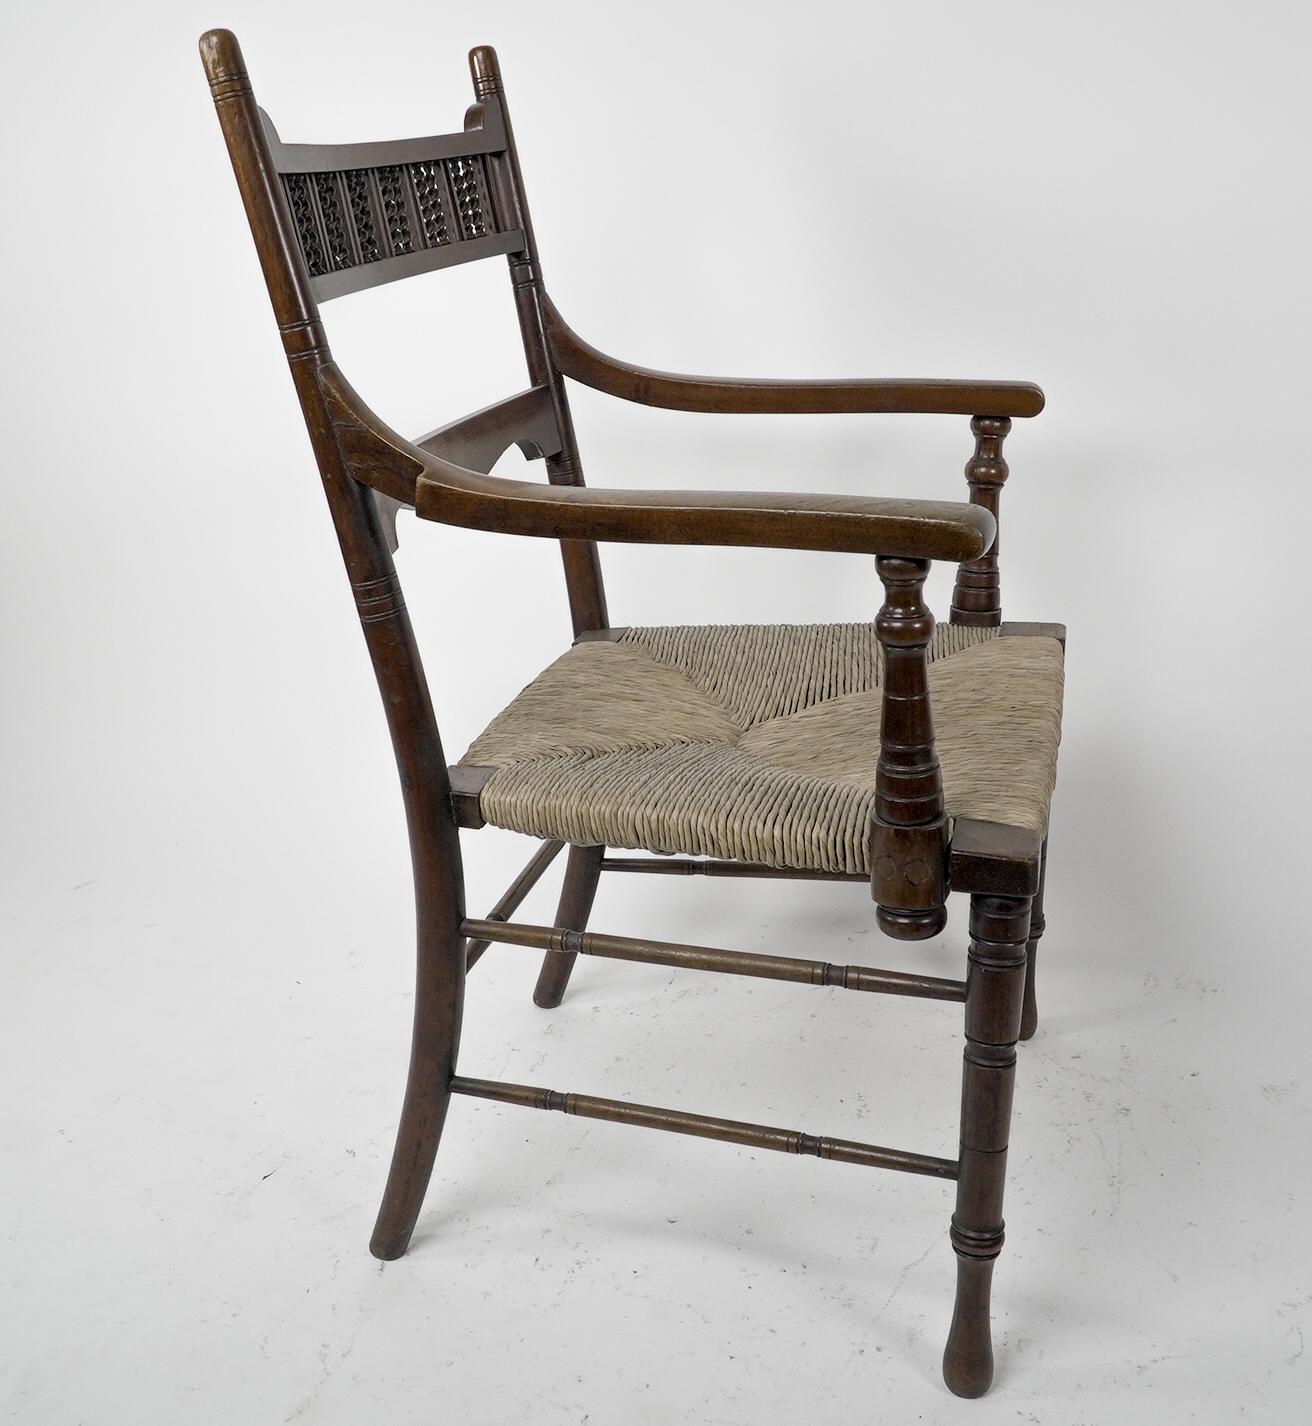 Late 19th Century George Bell & George Freeth Roper Aesthetic Movement Walnut rush seat armchair. For Sale